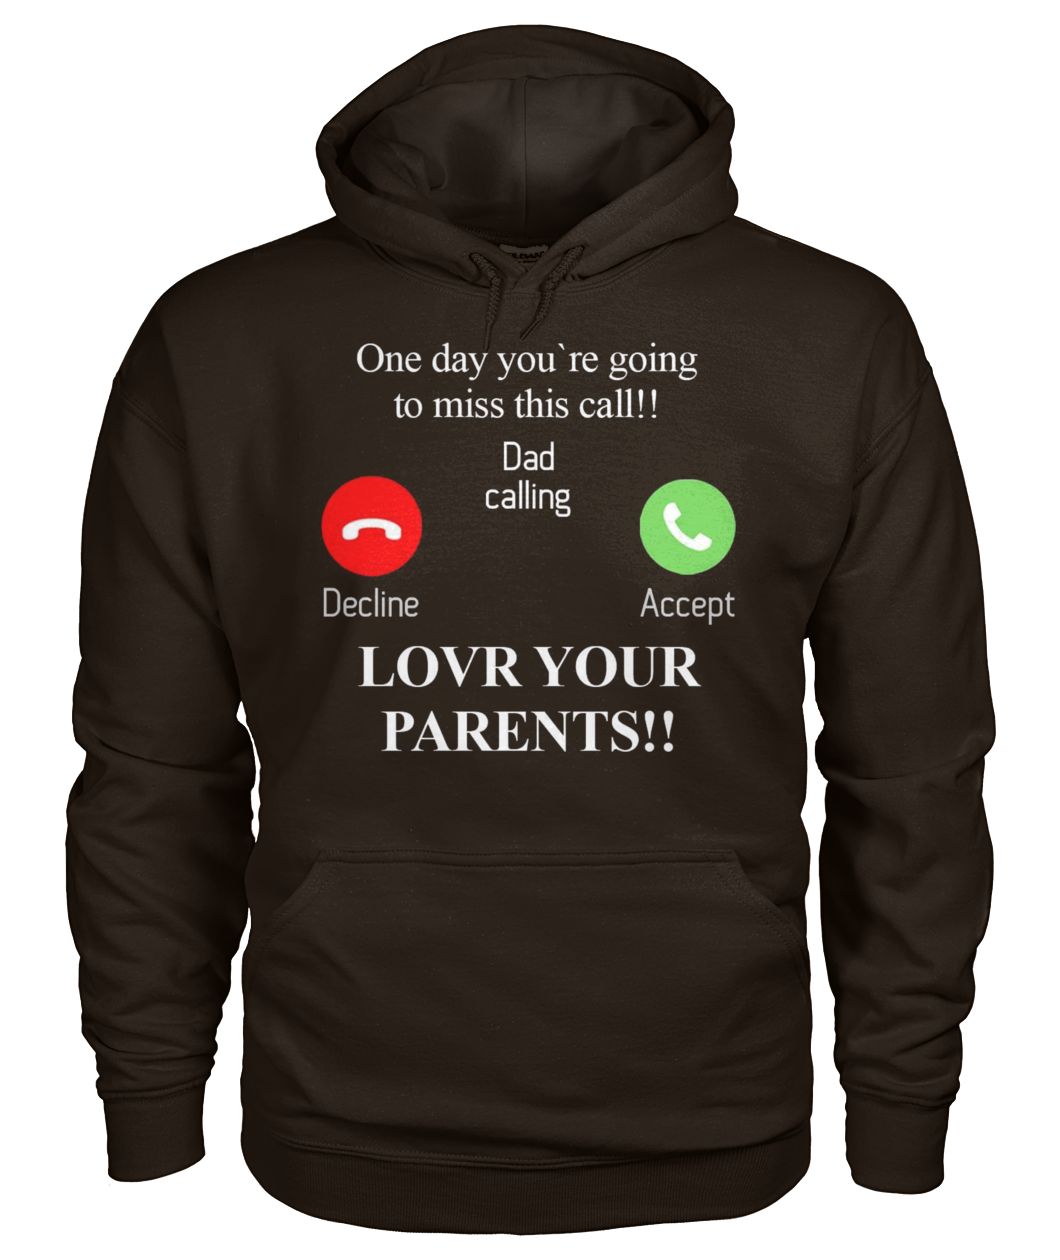 One day you're going to miss this call dad calling gildan hoodie